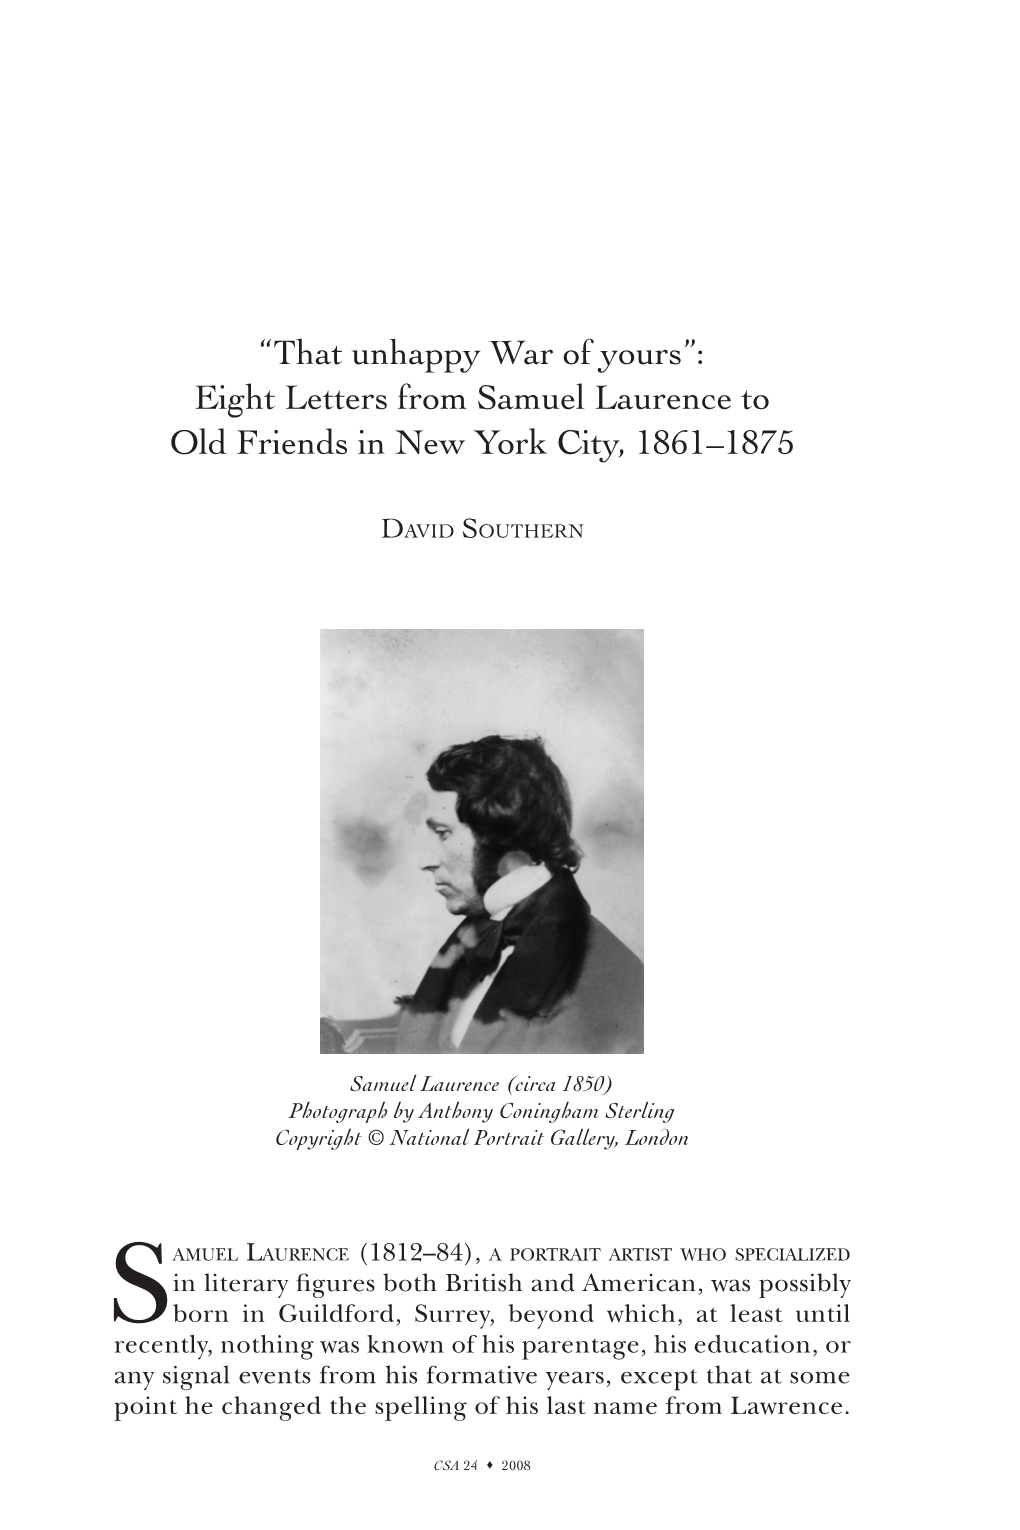 “That Unhappy War of Yours”: Eight Letters from Samuel Laurence to Old Friends in New York City, 1861–1875